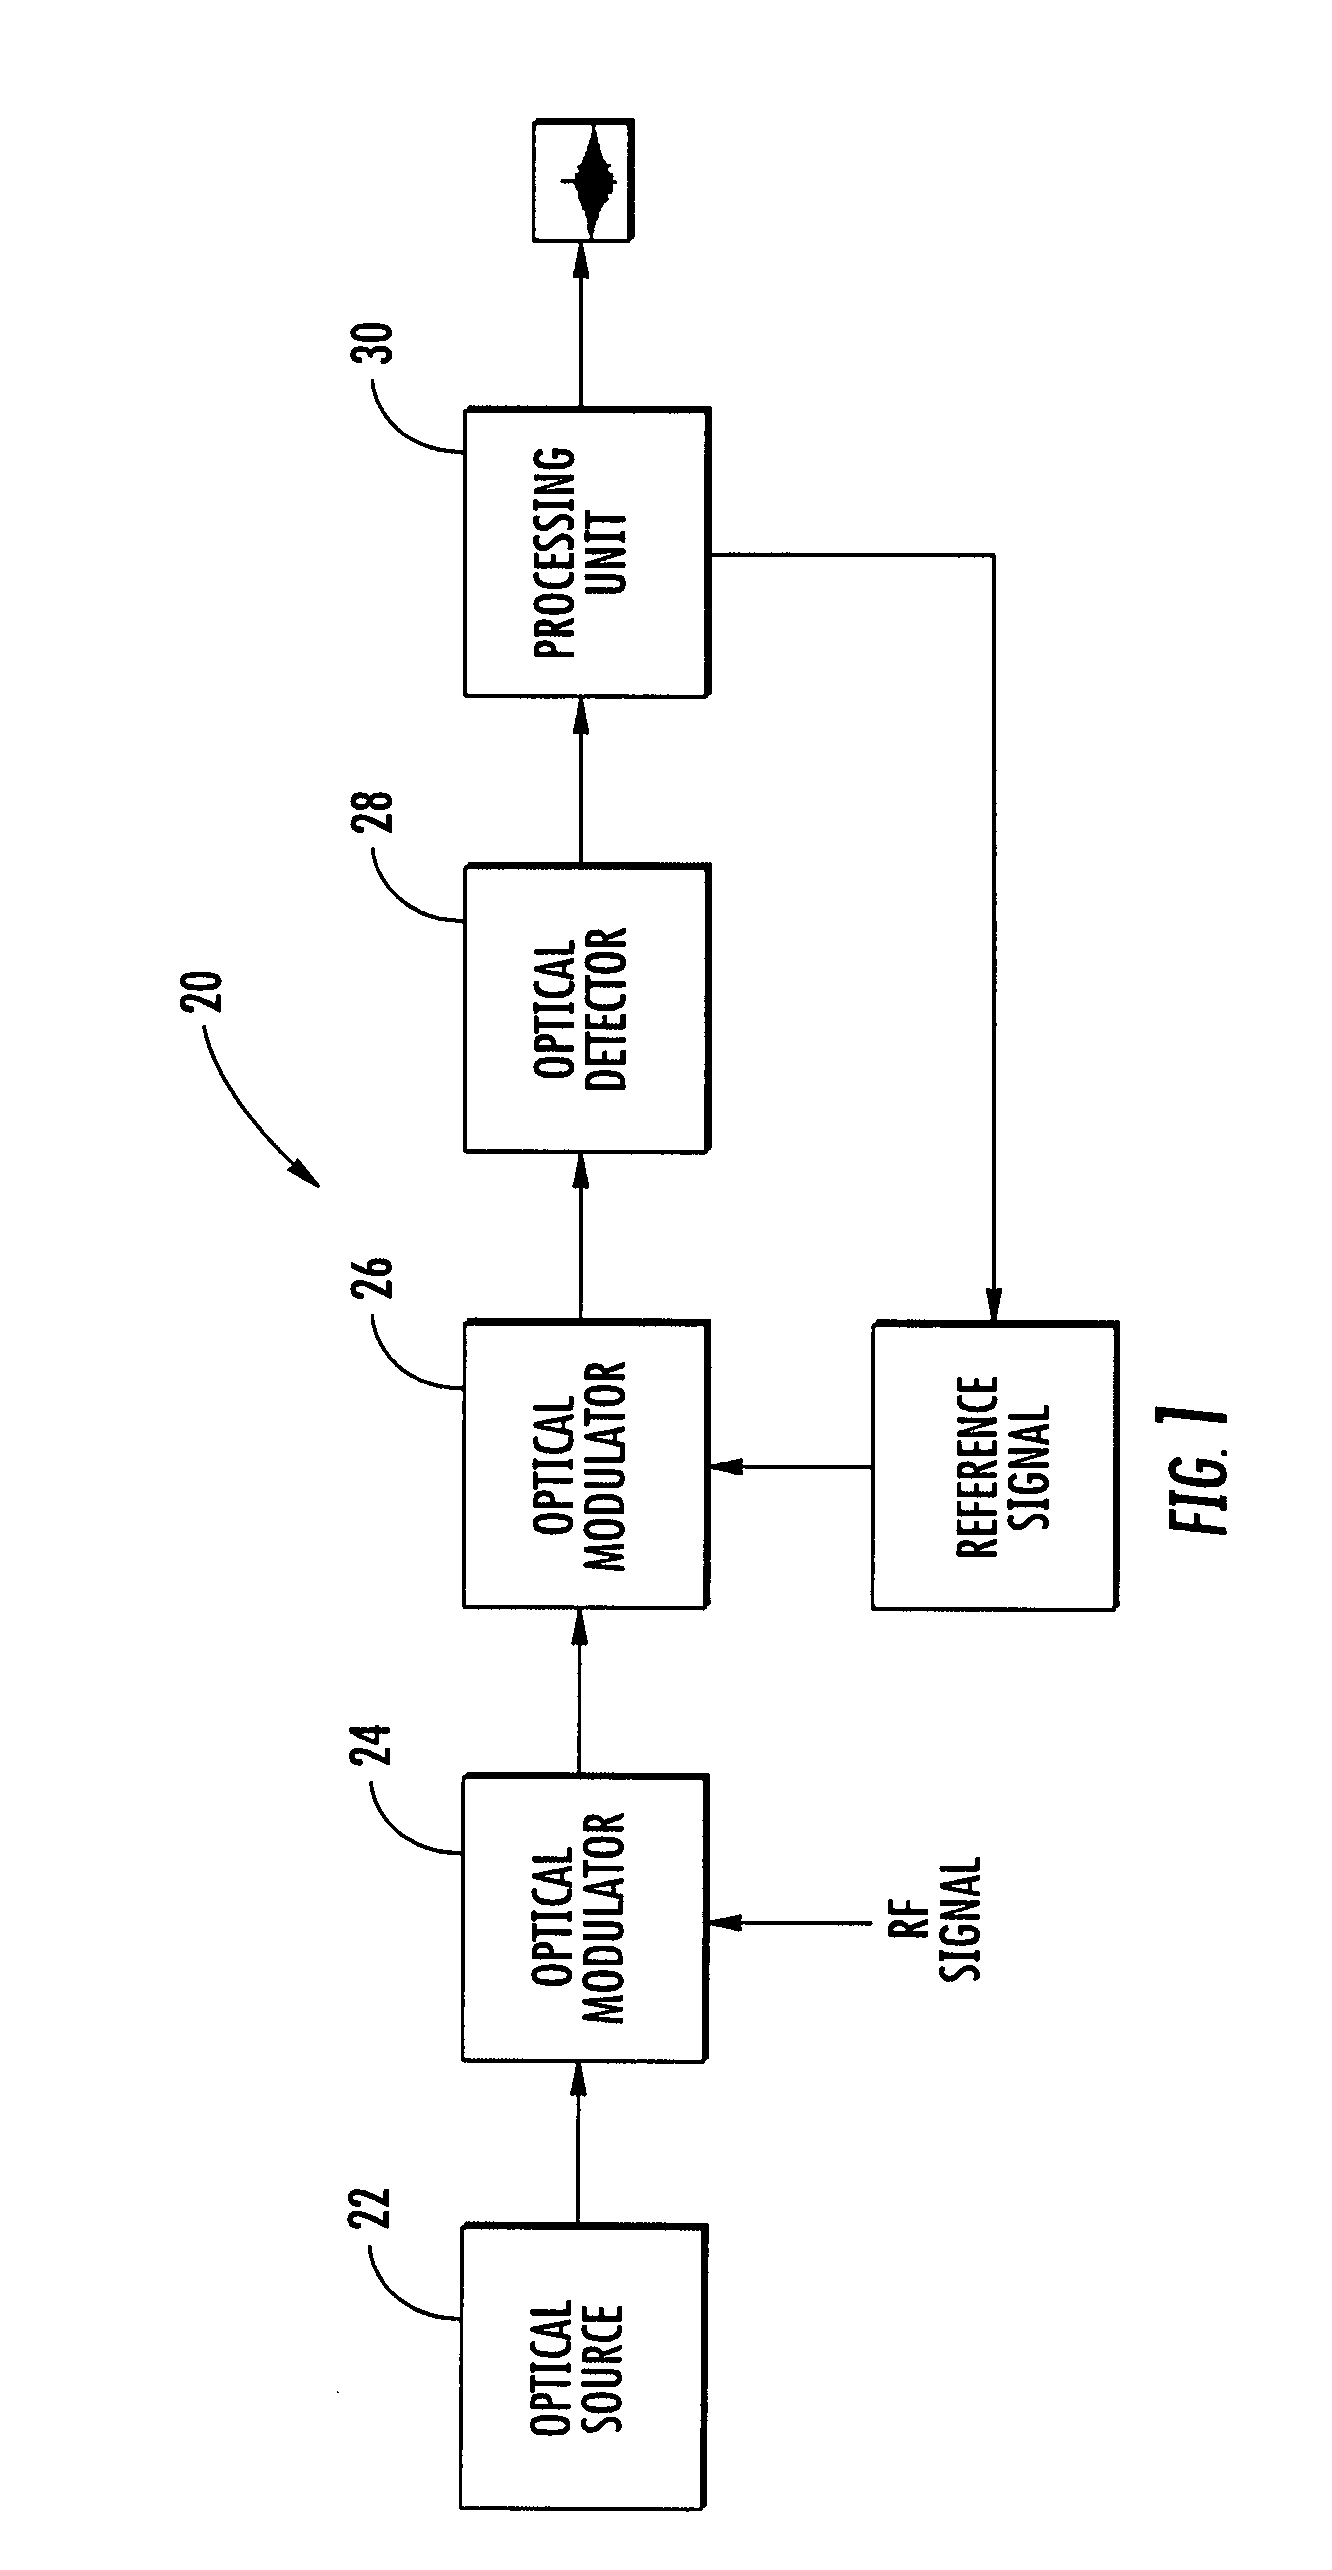 Radio frequency (RF) signal receiver using optical processing and associated methods